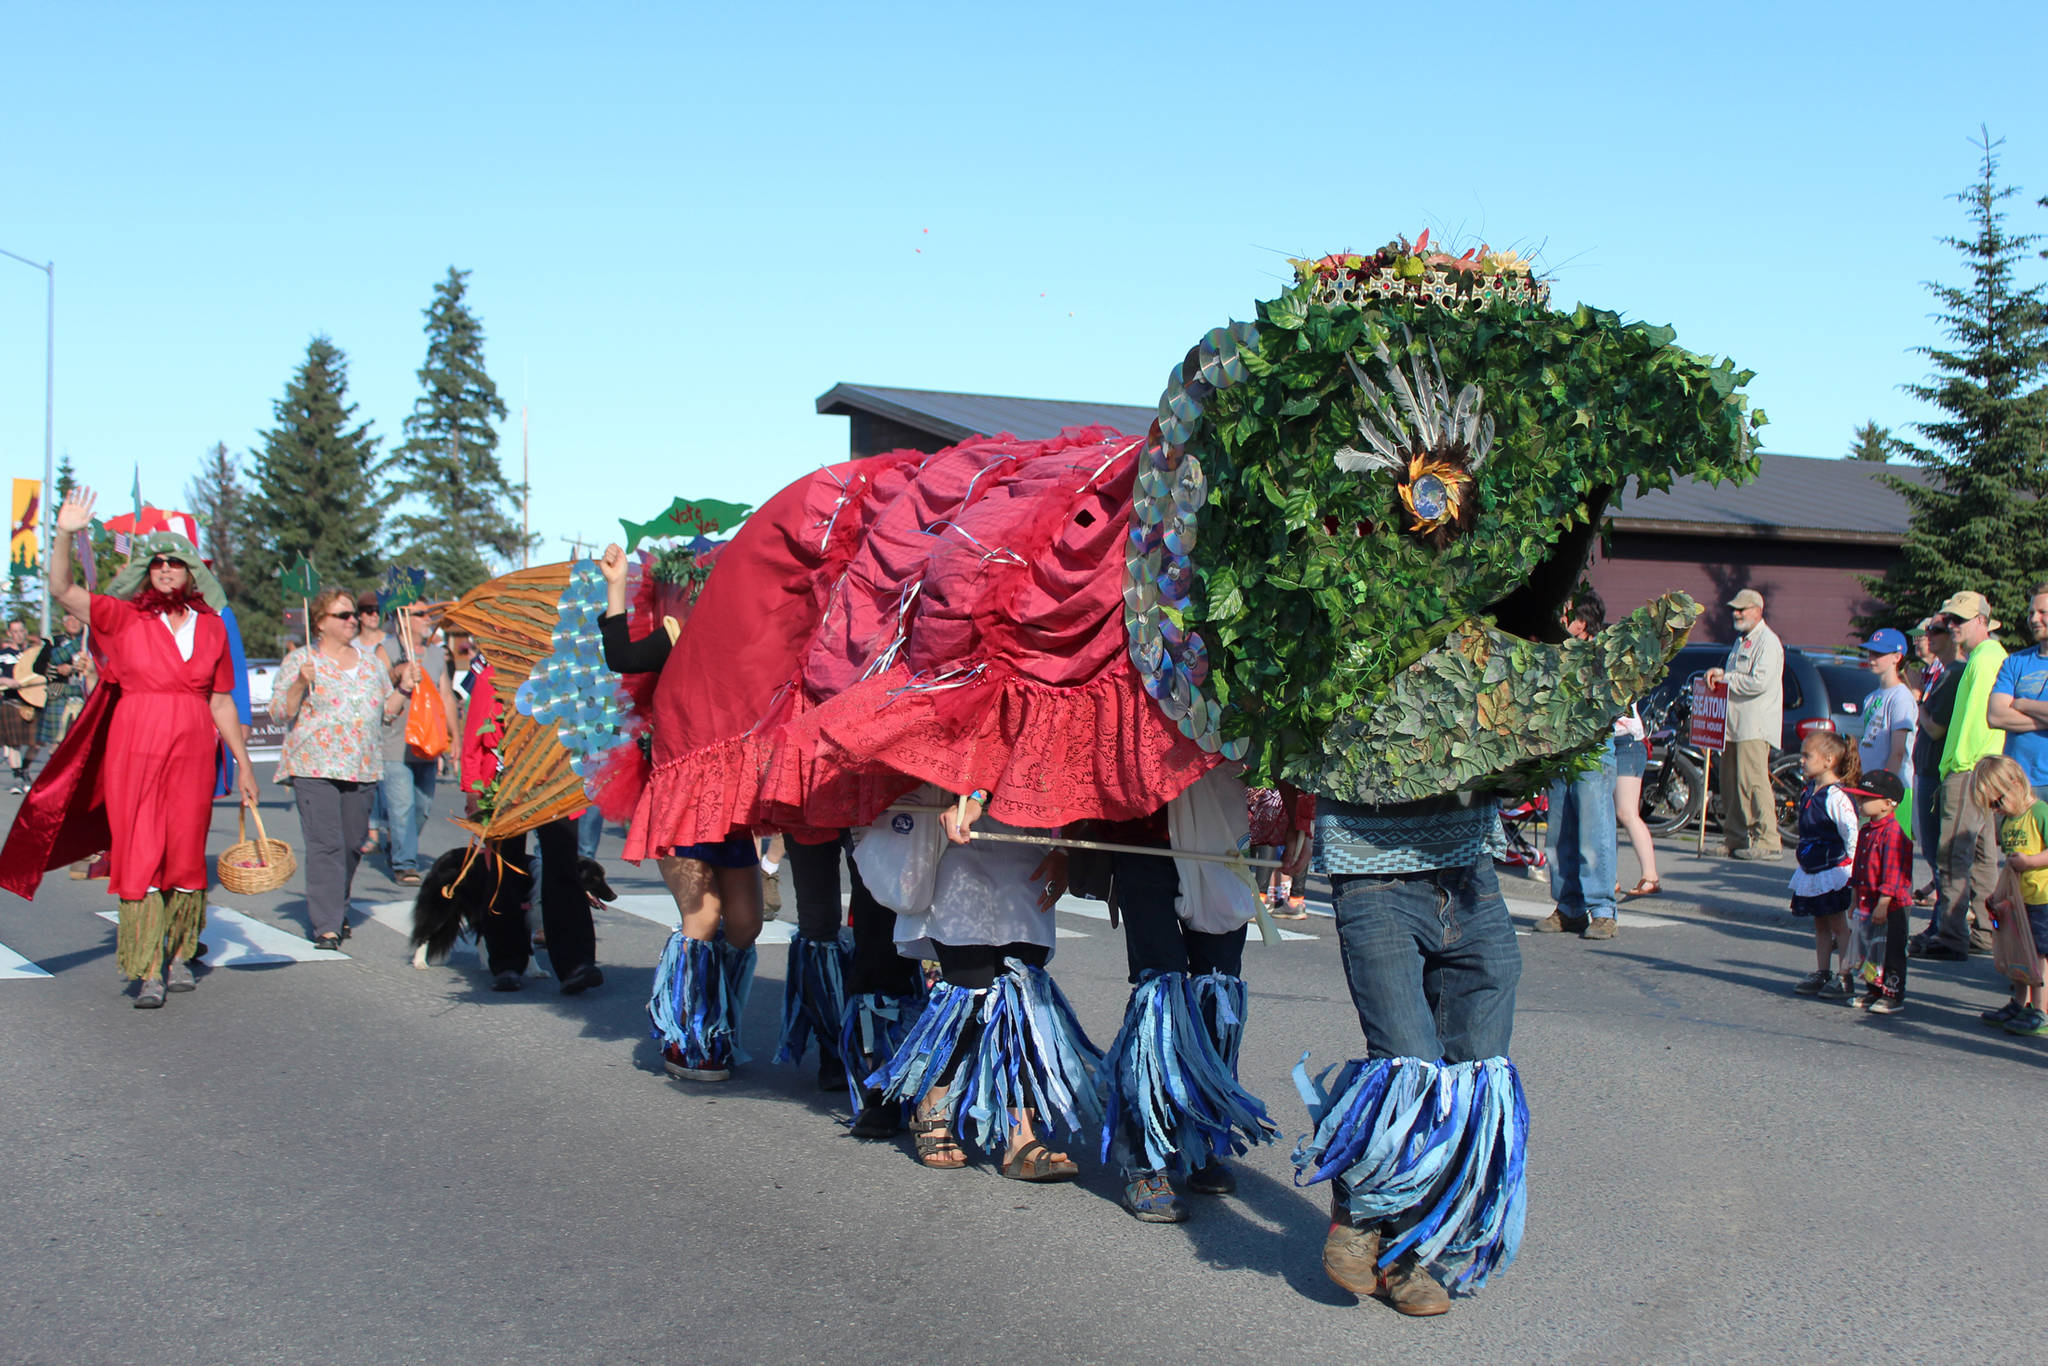 Several people walking down Pioneer Avenue in a giant salmon costume for Cook Inletkeeper’s portion of the Independence Day parade Wednesday, July 4, 2018 in Homer, Alaska. Other participants carried signs promoting the Stand for Salmon initiative. (Photo by Megan Pacer/Homer News)